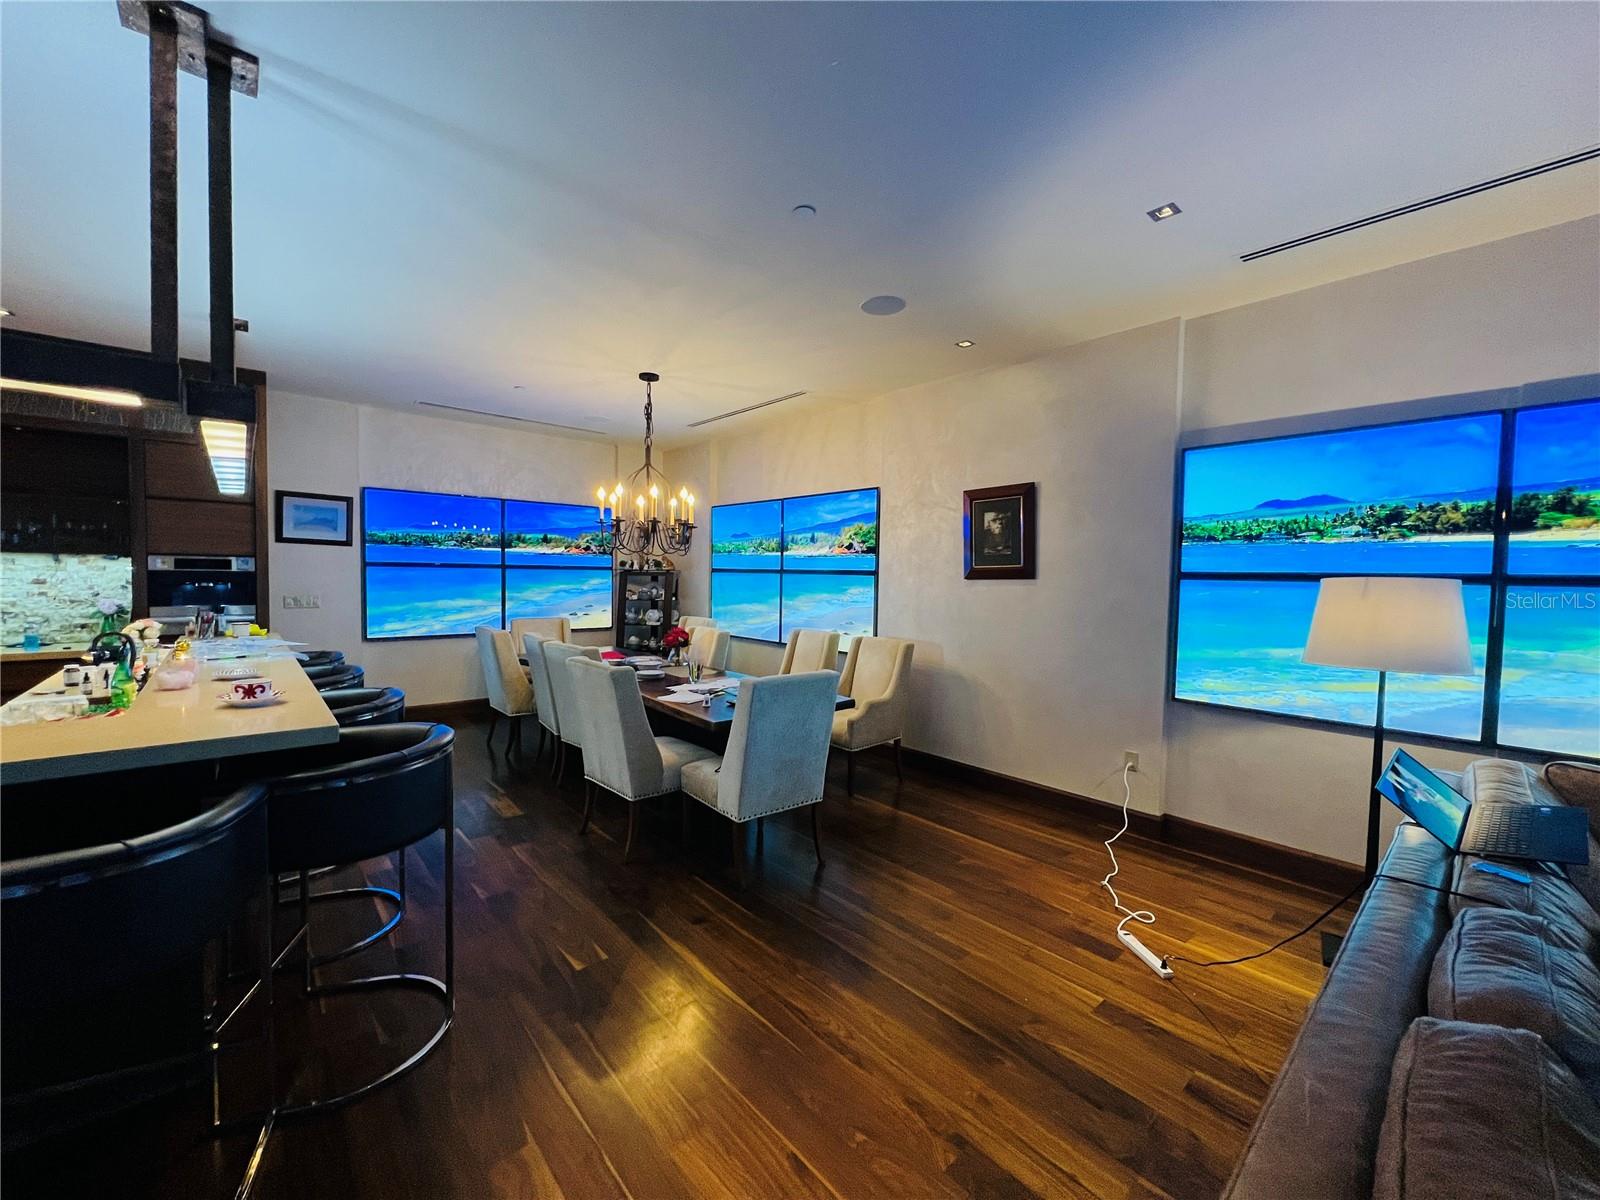 Wirtual WIndows bring ANY reality u want to your living room - APp Controlled - Full Room of Equipment over 150k in cost